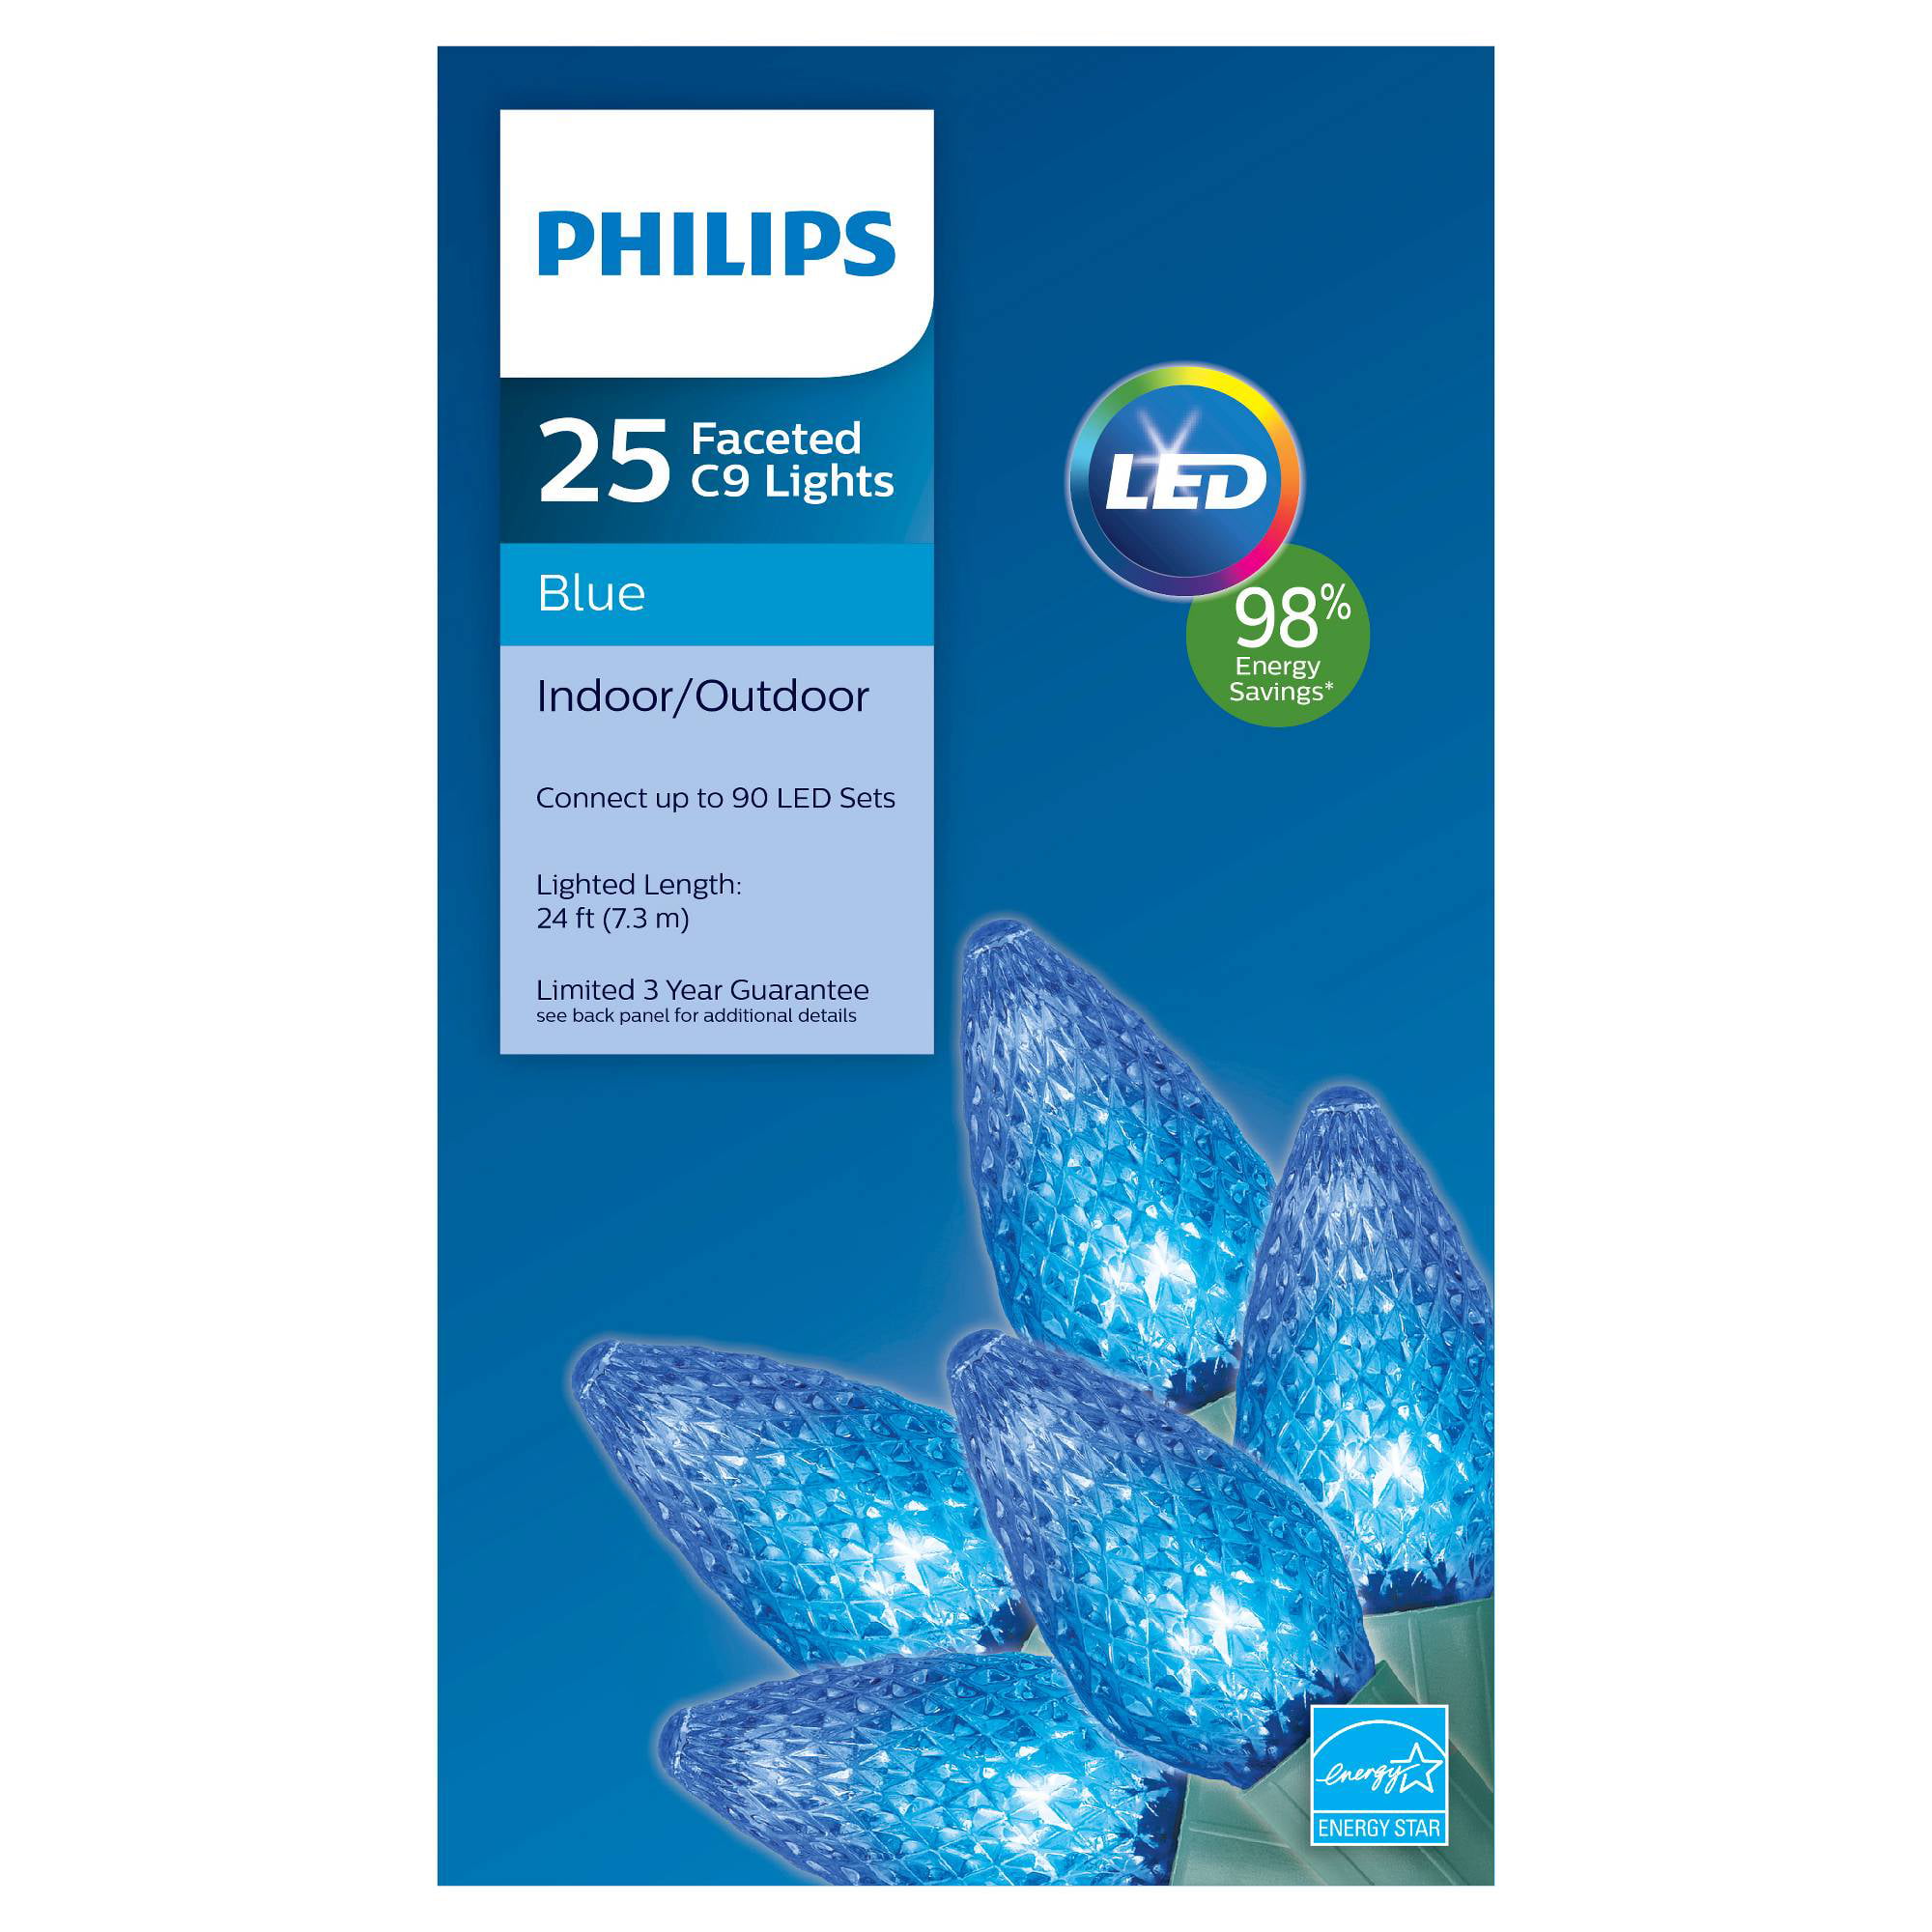 Philips 25ct. LED Faceted C9 String Lights - Blue Bulbs Indoor/Outdoor